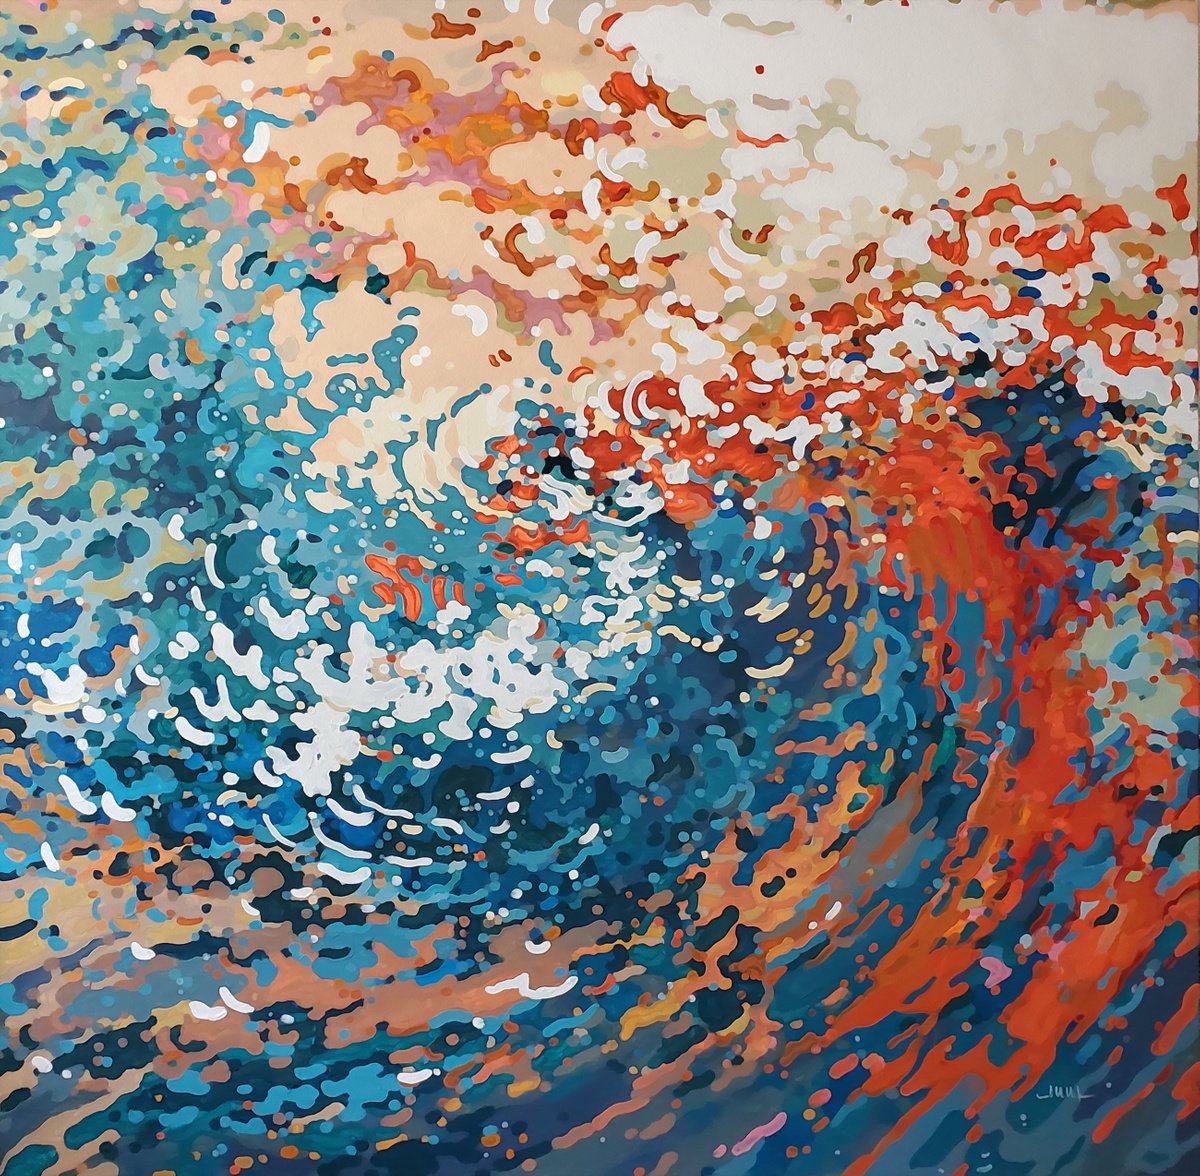 Force of Nature, 48 x 48 x 1.5 by Margaret Juul